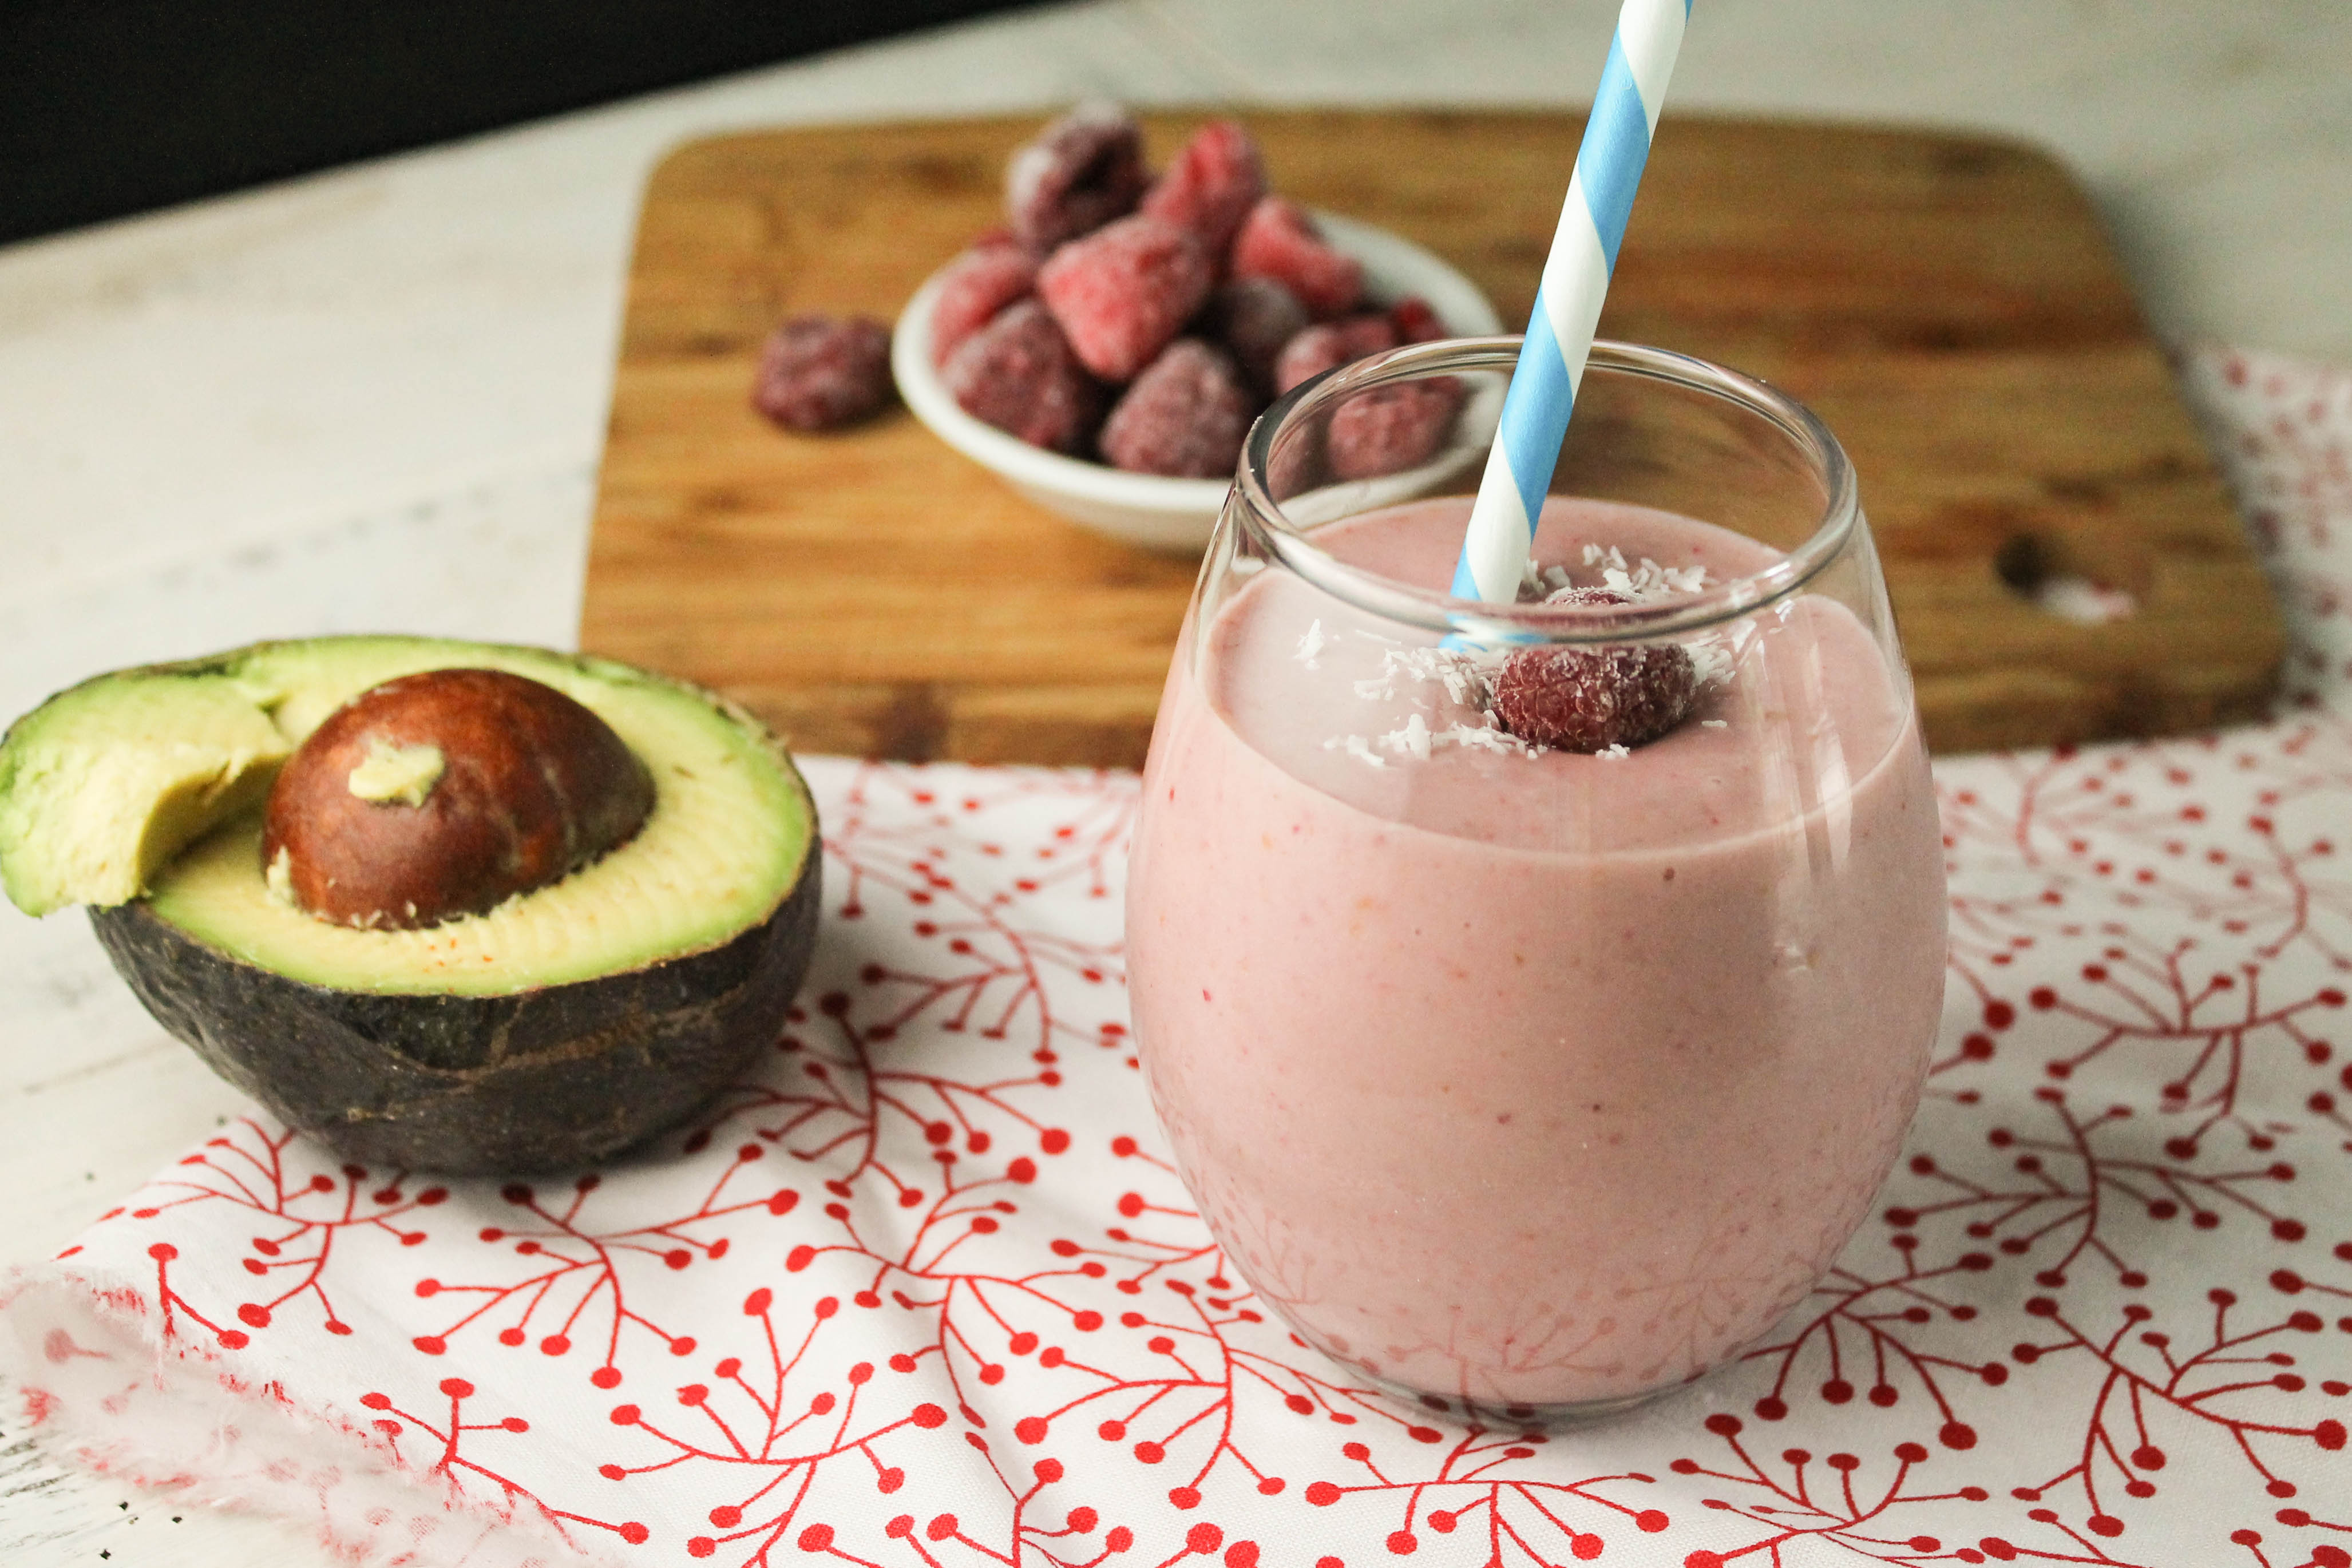 pale pink raspberry smoothie in a clear glass with a blue and white paper straw, a halved avocado and a garnish of coconut flakes and frozen raspberries